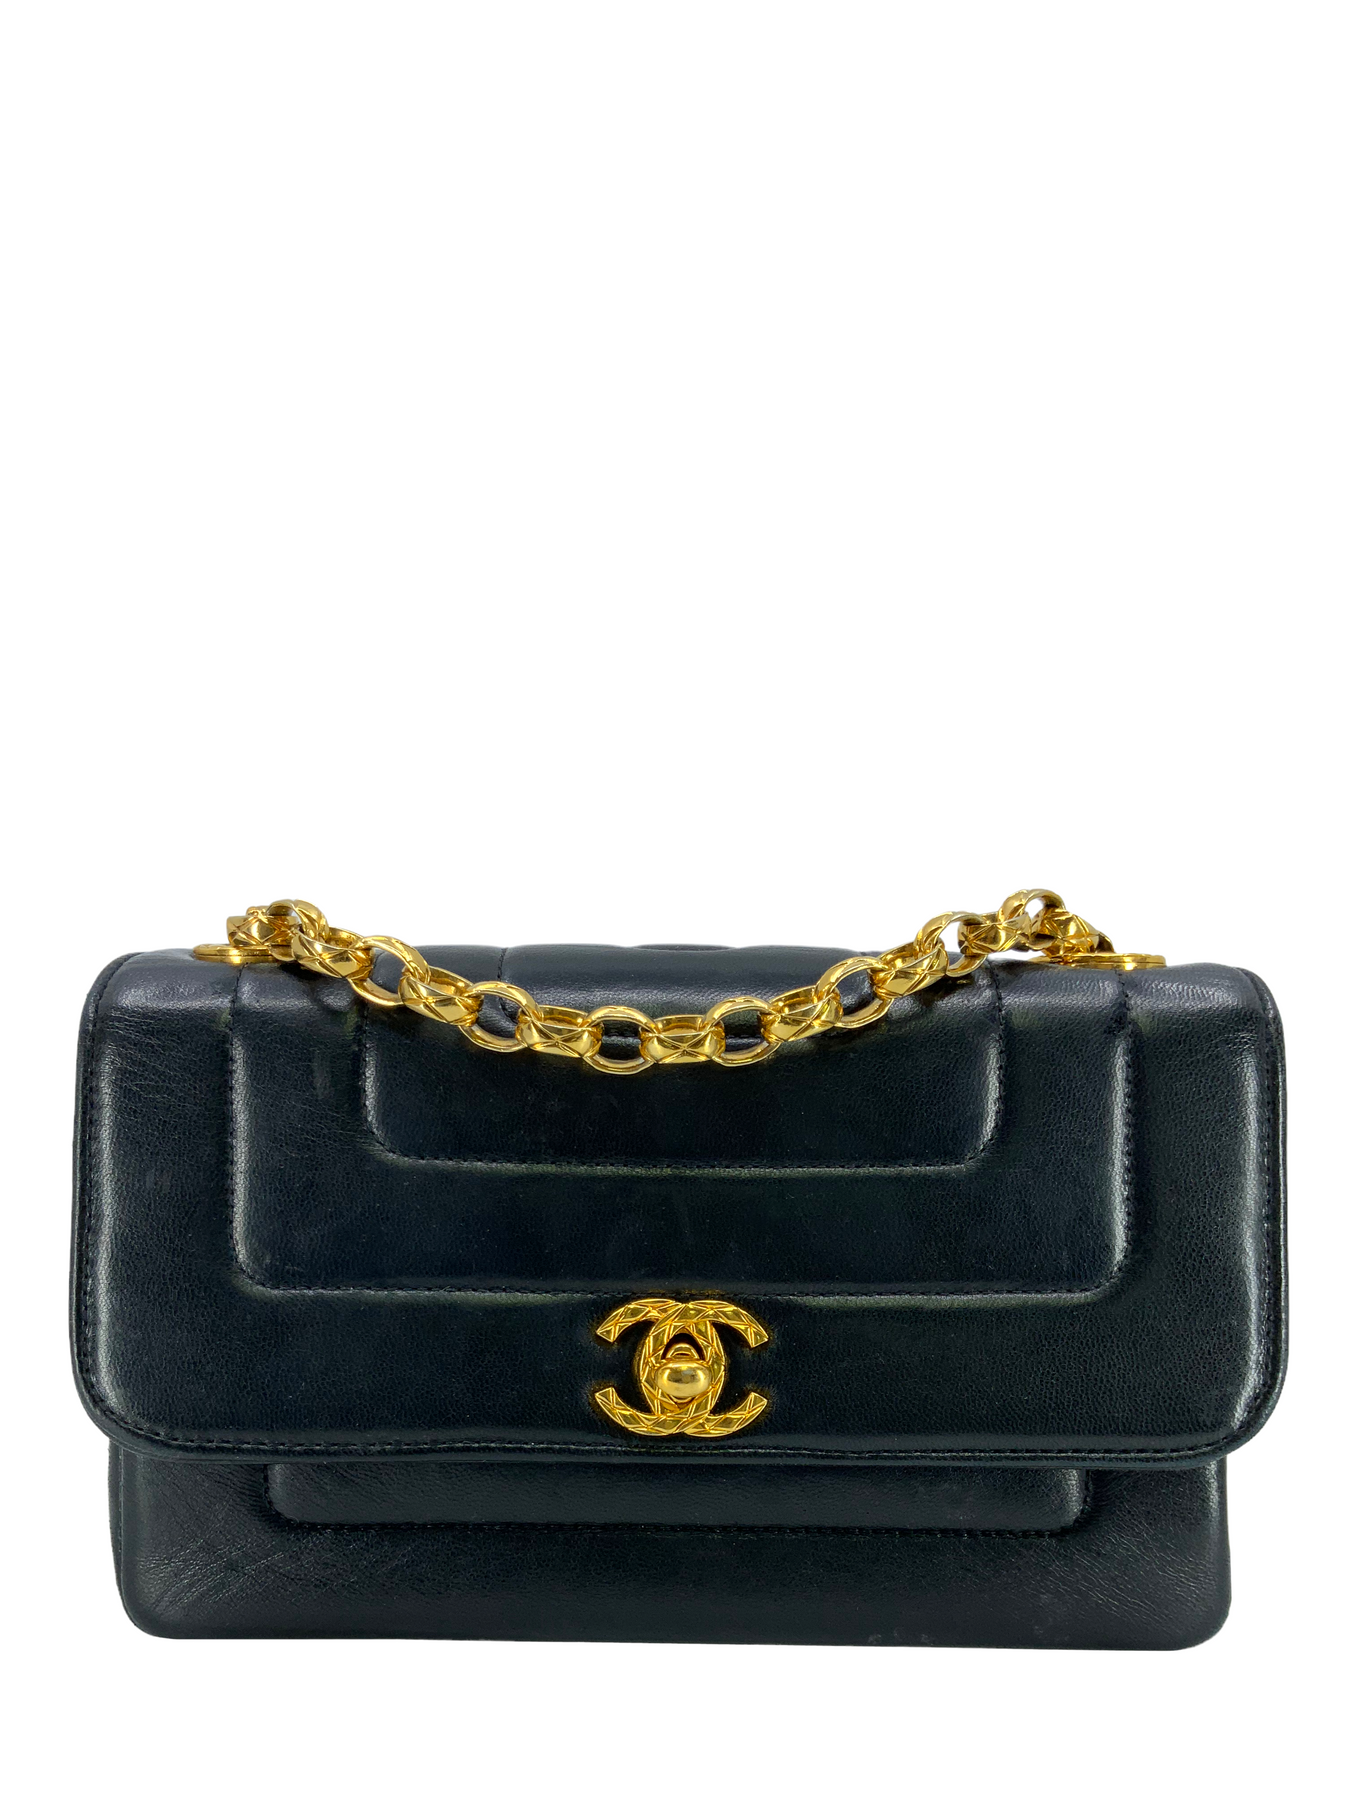 Chanel Vintage Quilted Vertical Stitch Lambskin Classic Mini Flap